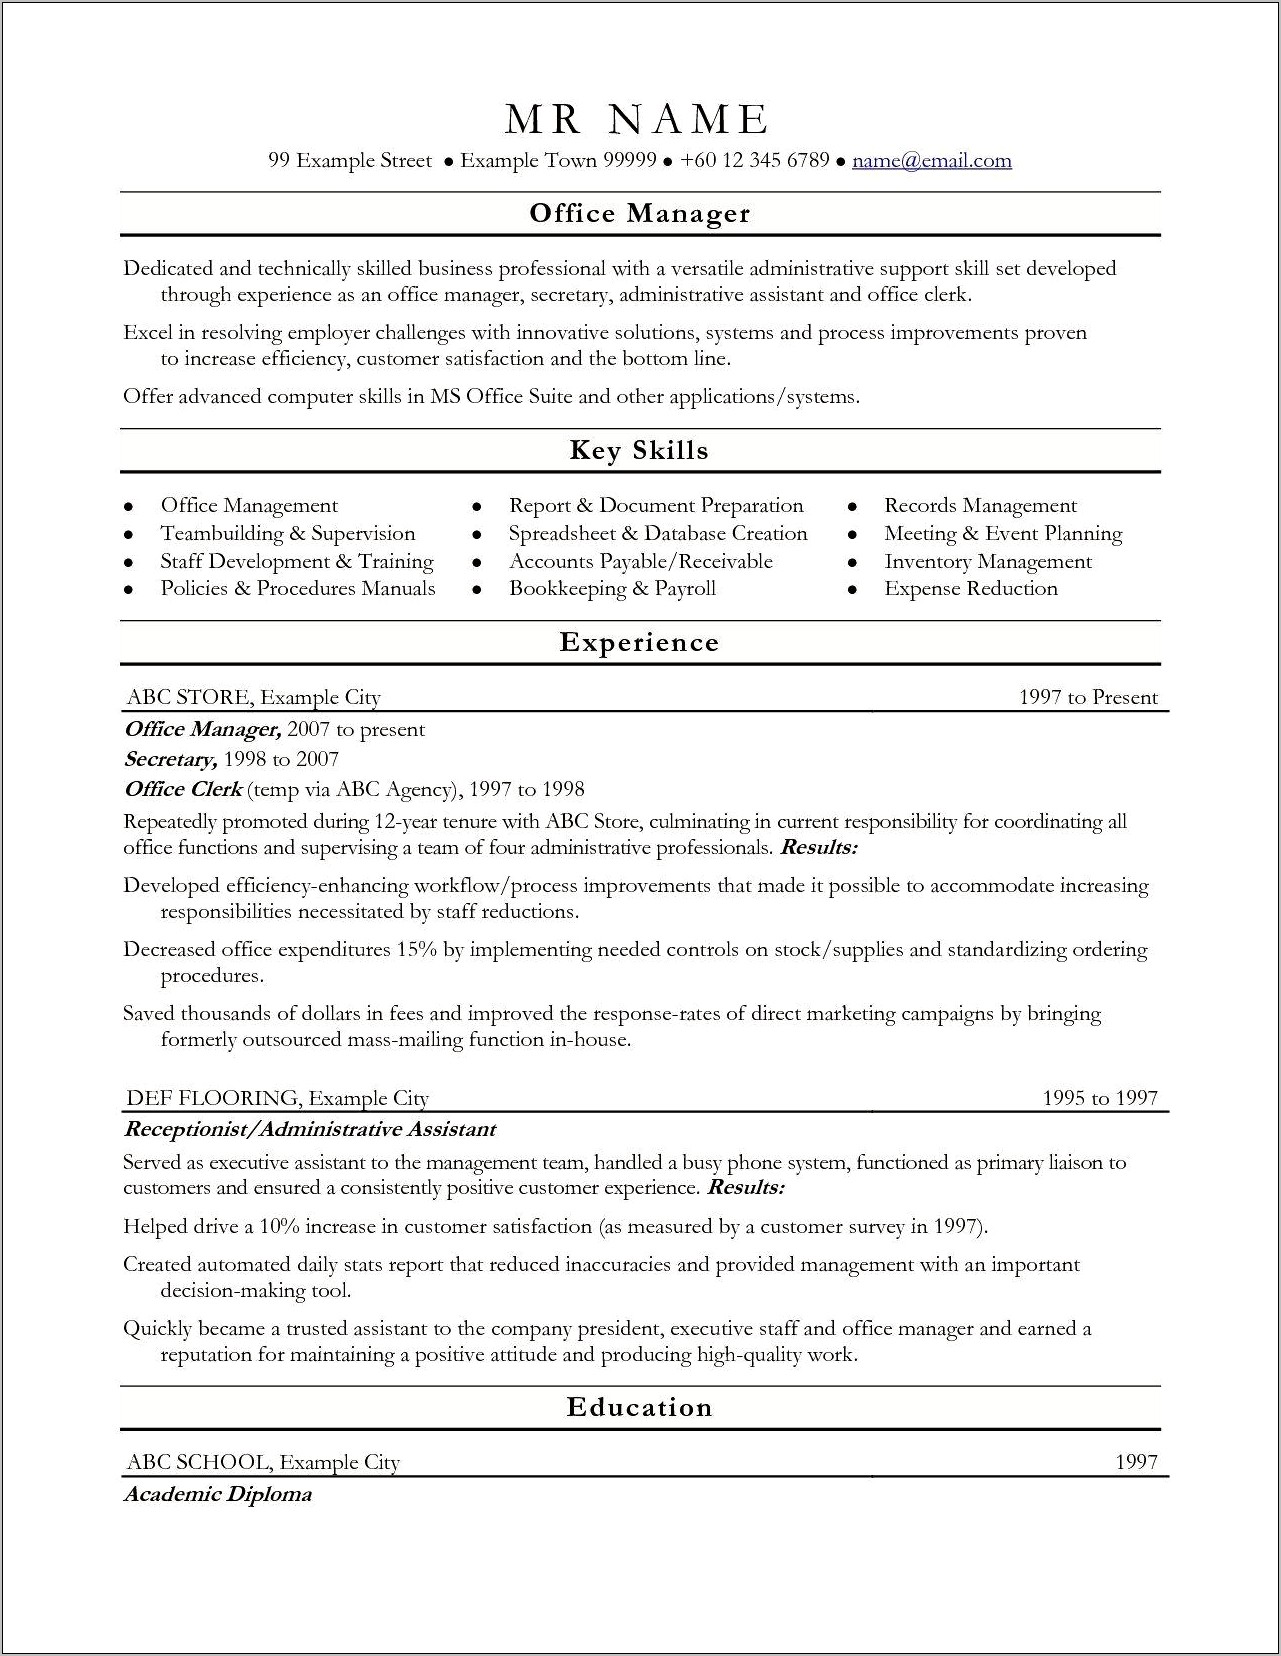 Technical Skill Set In Resume